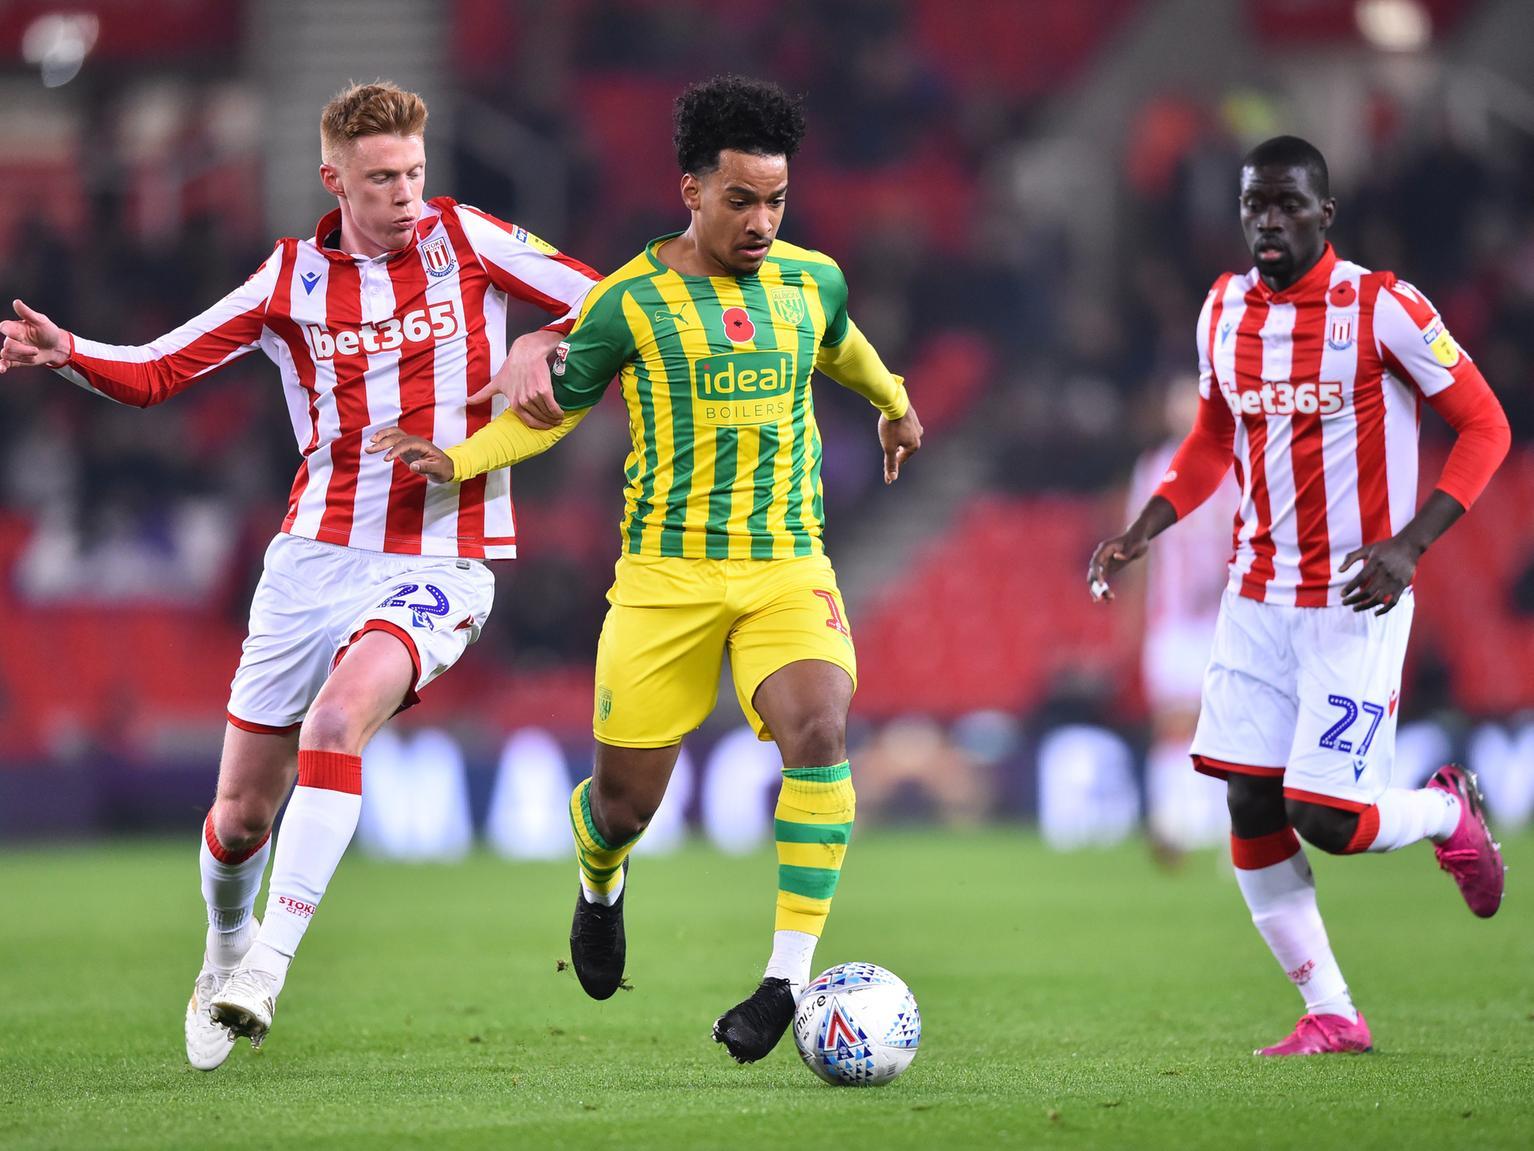 West Brom's 23-year-old Brazilian winger on loan from Sporting Lisbon already has five assists. Photo by Nathan Stirk/Getty Images.